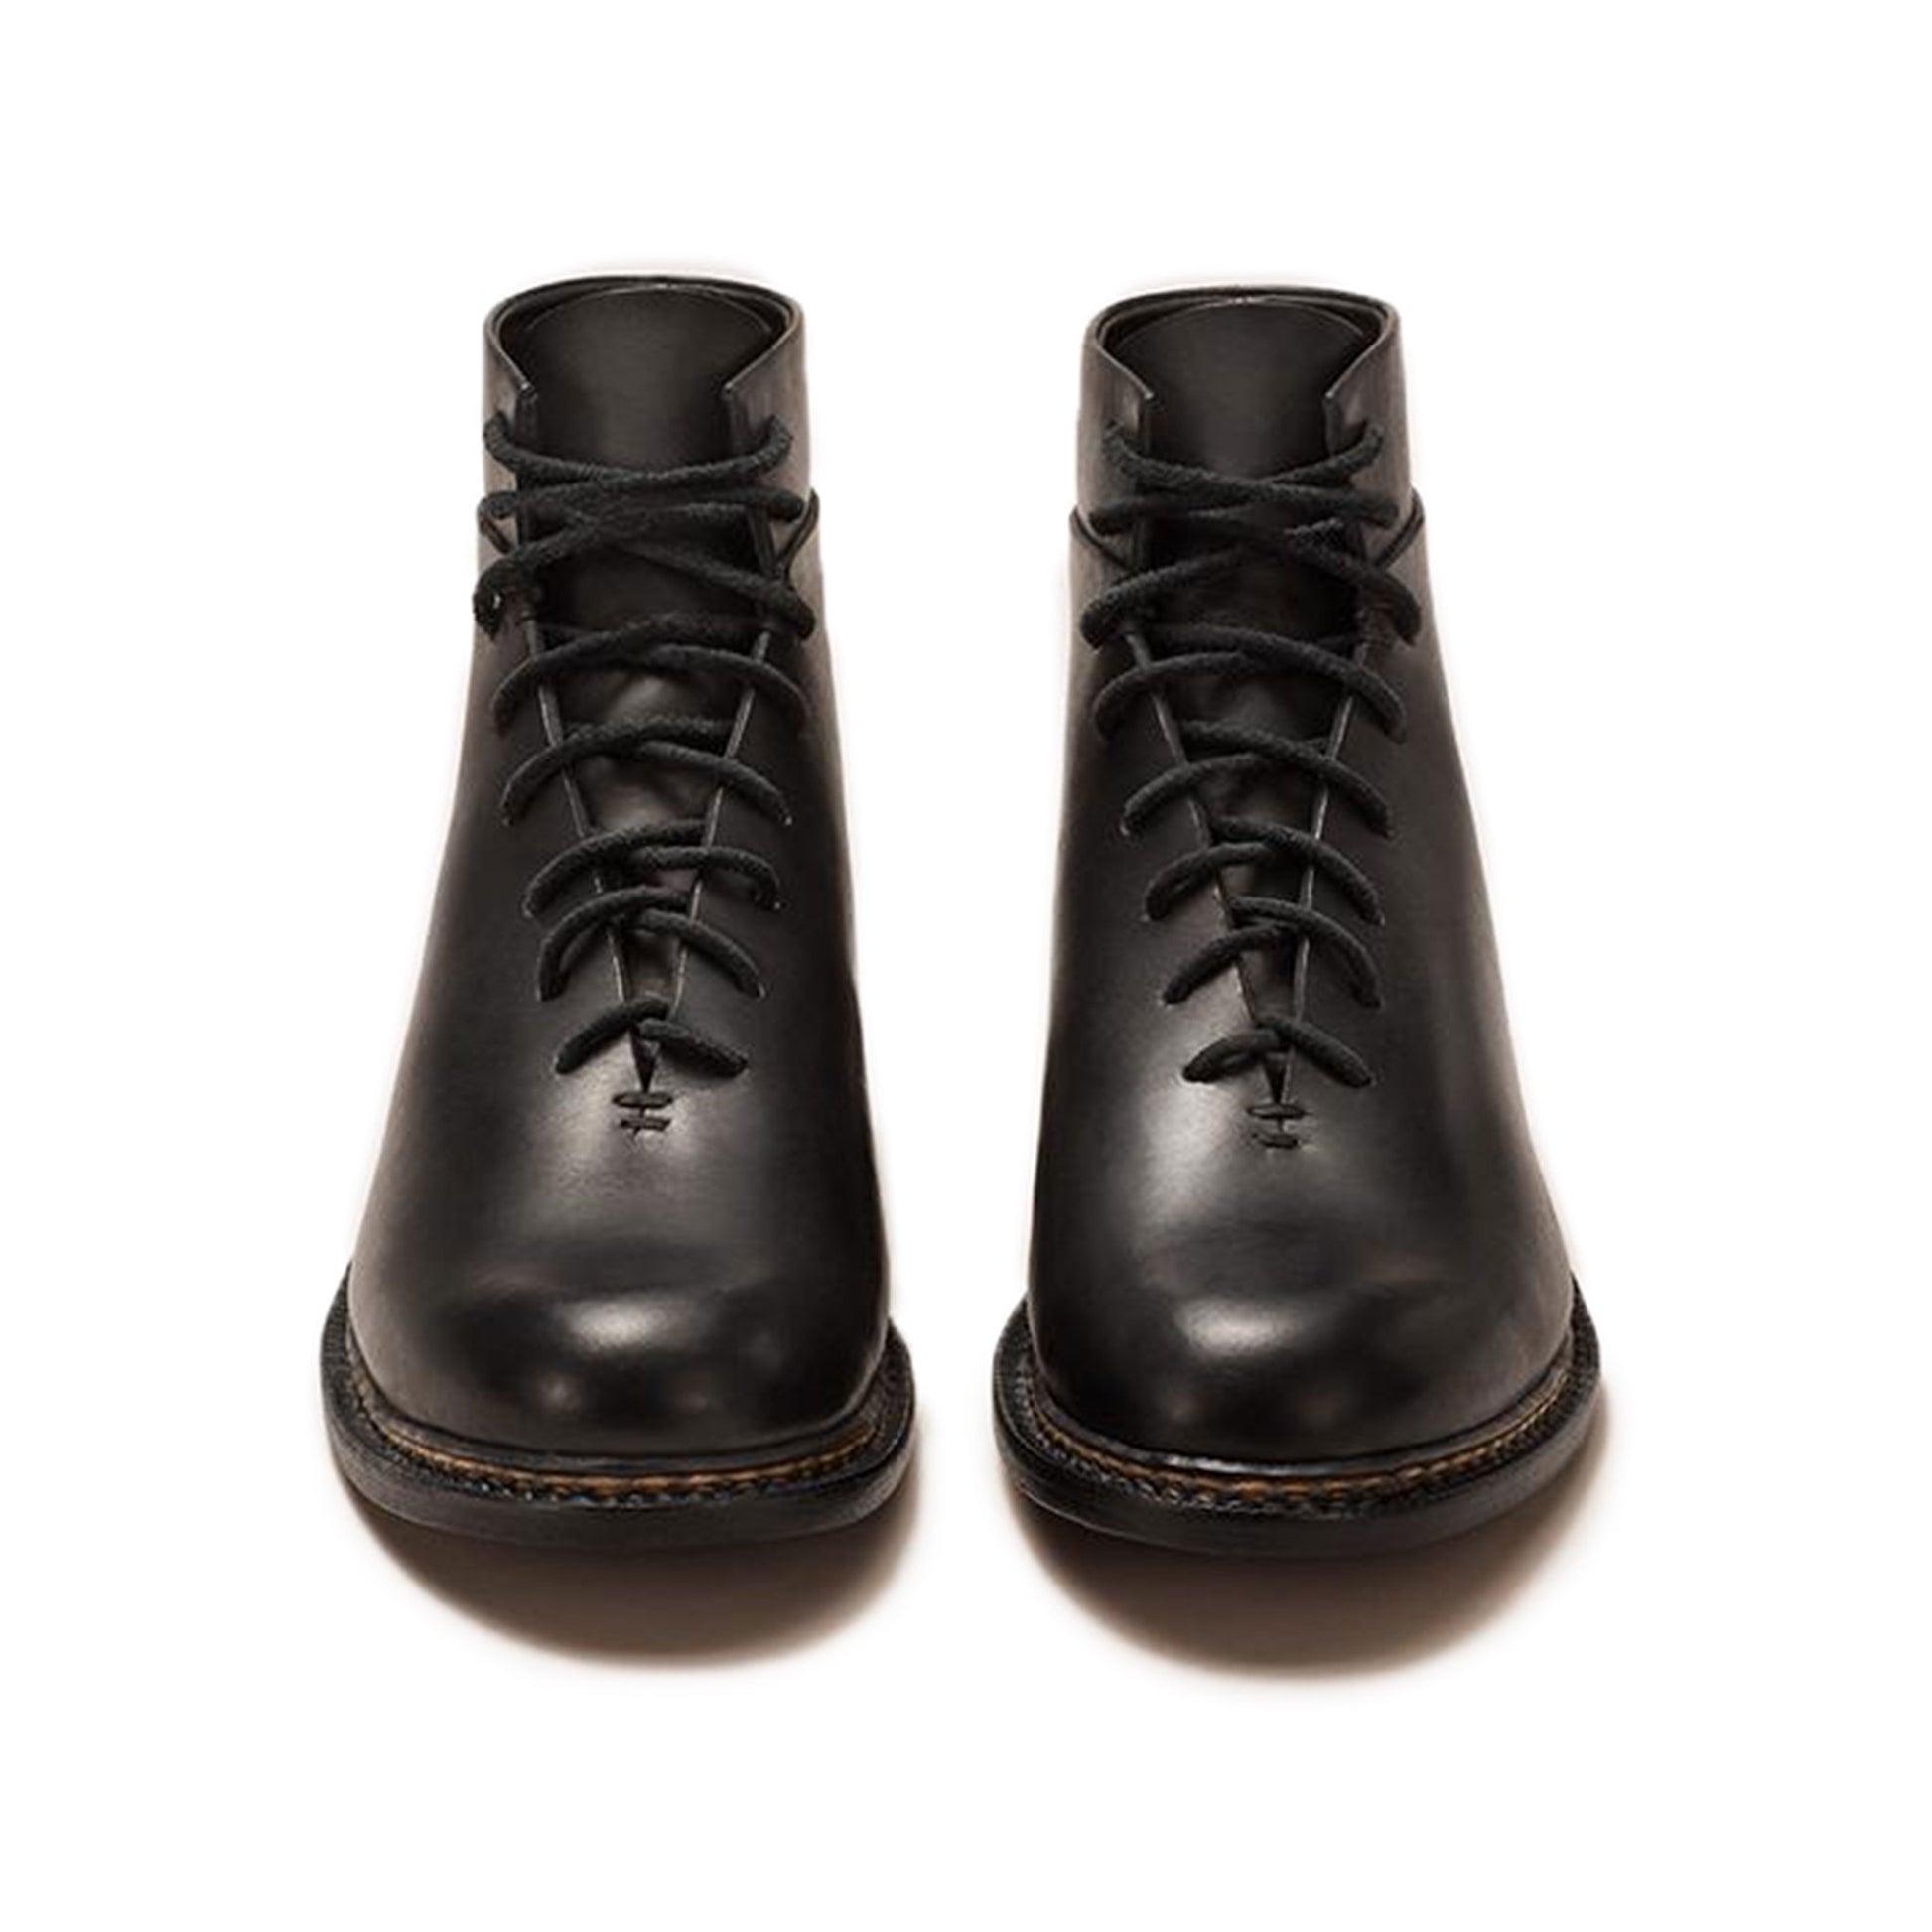 FEIT Braided Lace-Up Boots Footwear Shoes Leather Black Front